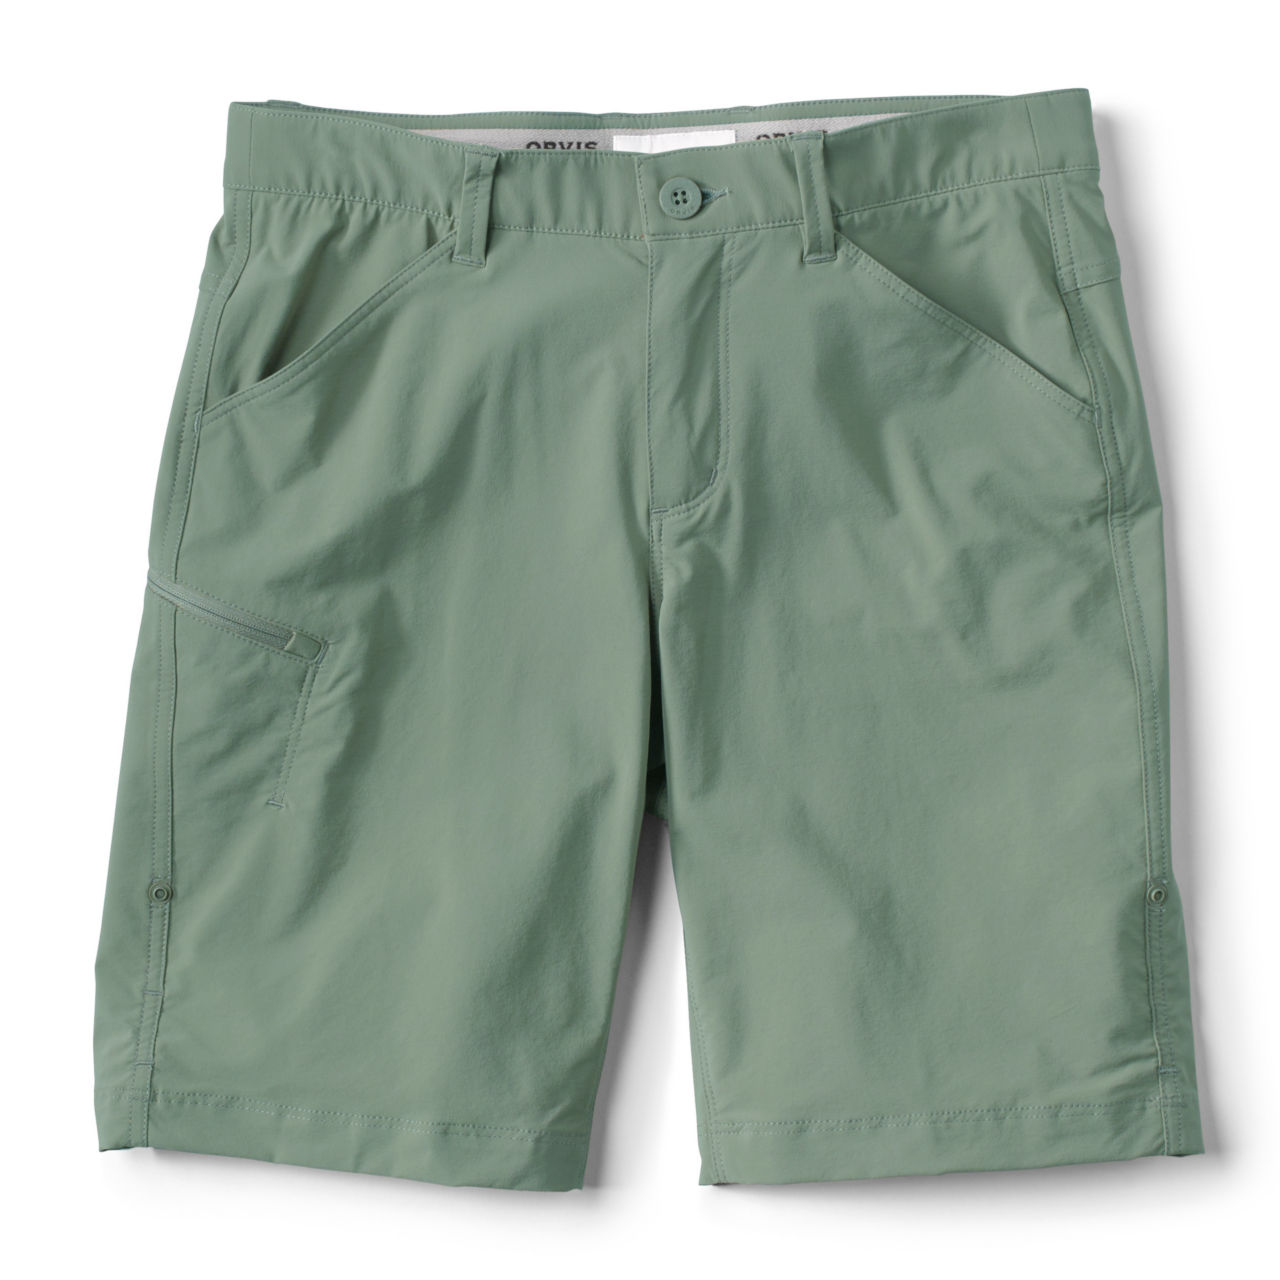 Jackson Quick-Dry Convertible 8" Shorts - FOREST image number 3